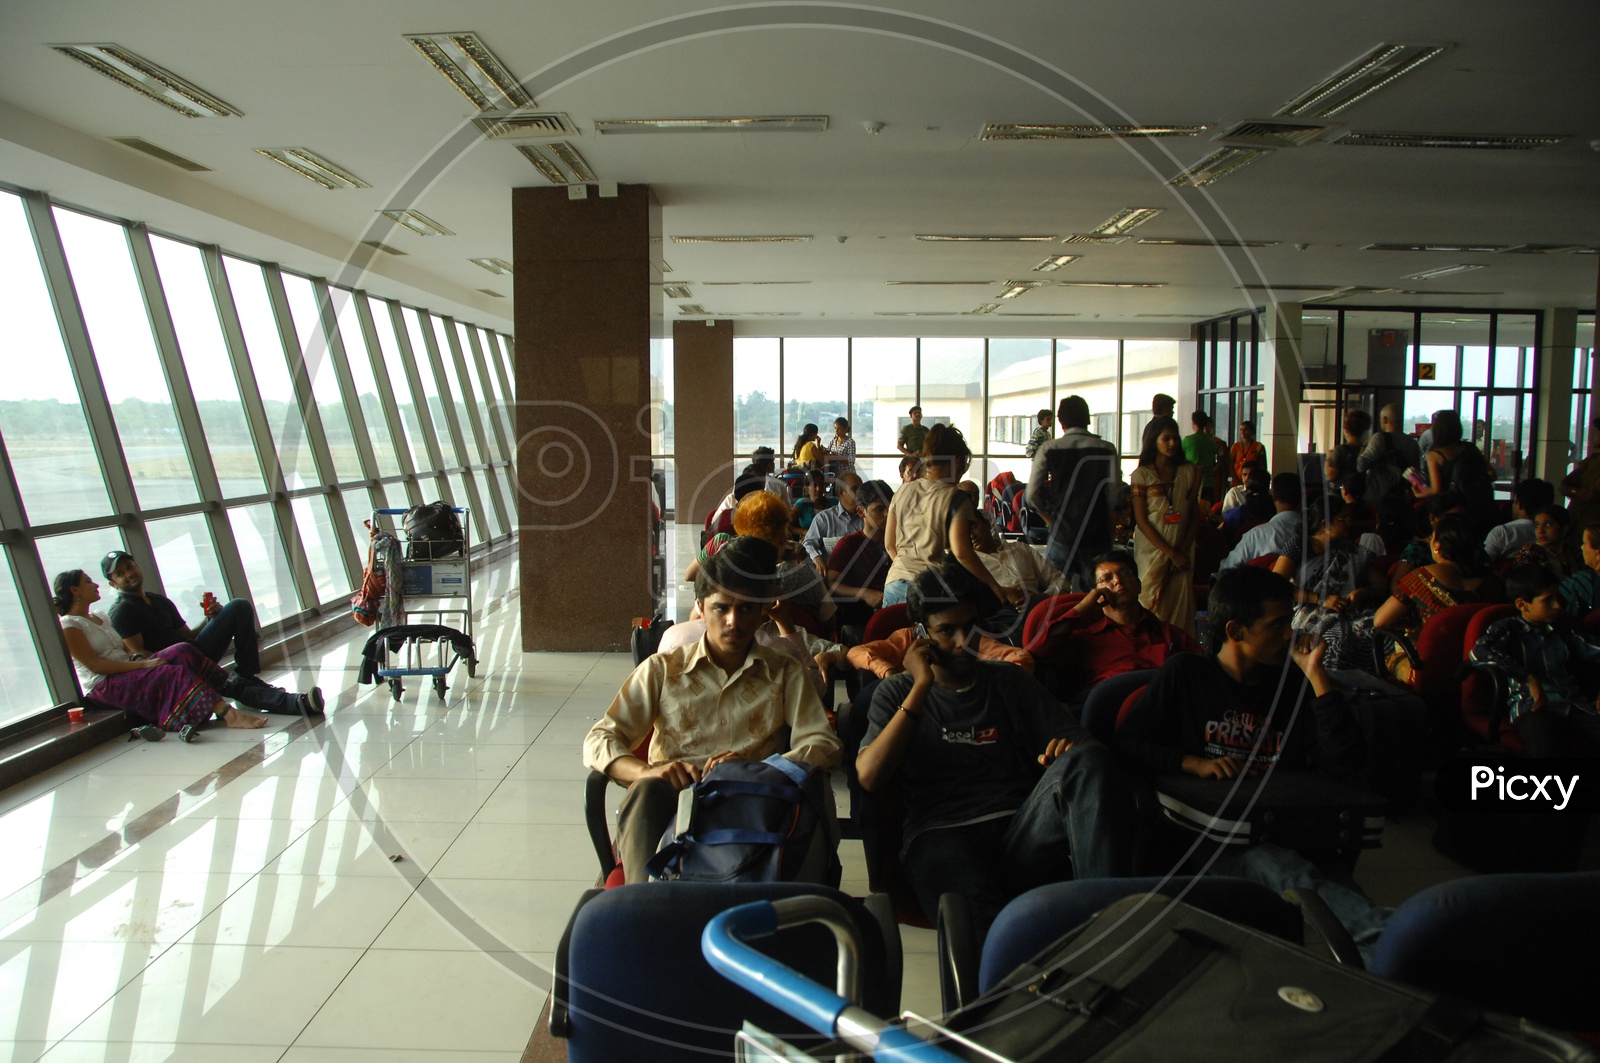 Passengers Waiting In an Airport Waiting Lounge